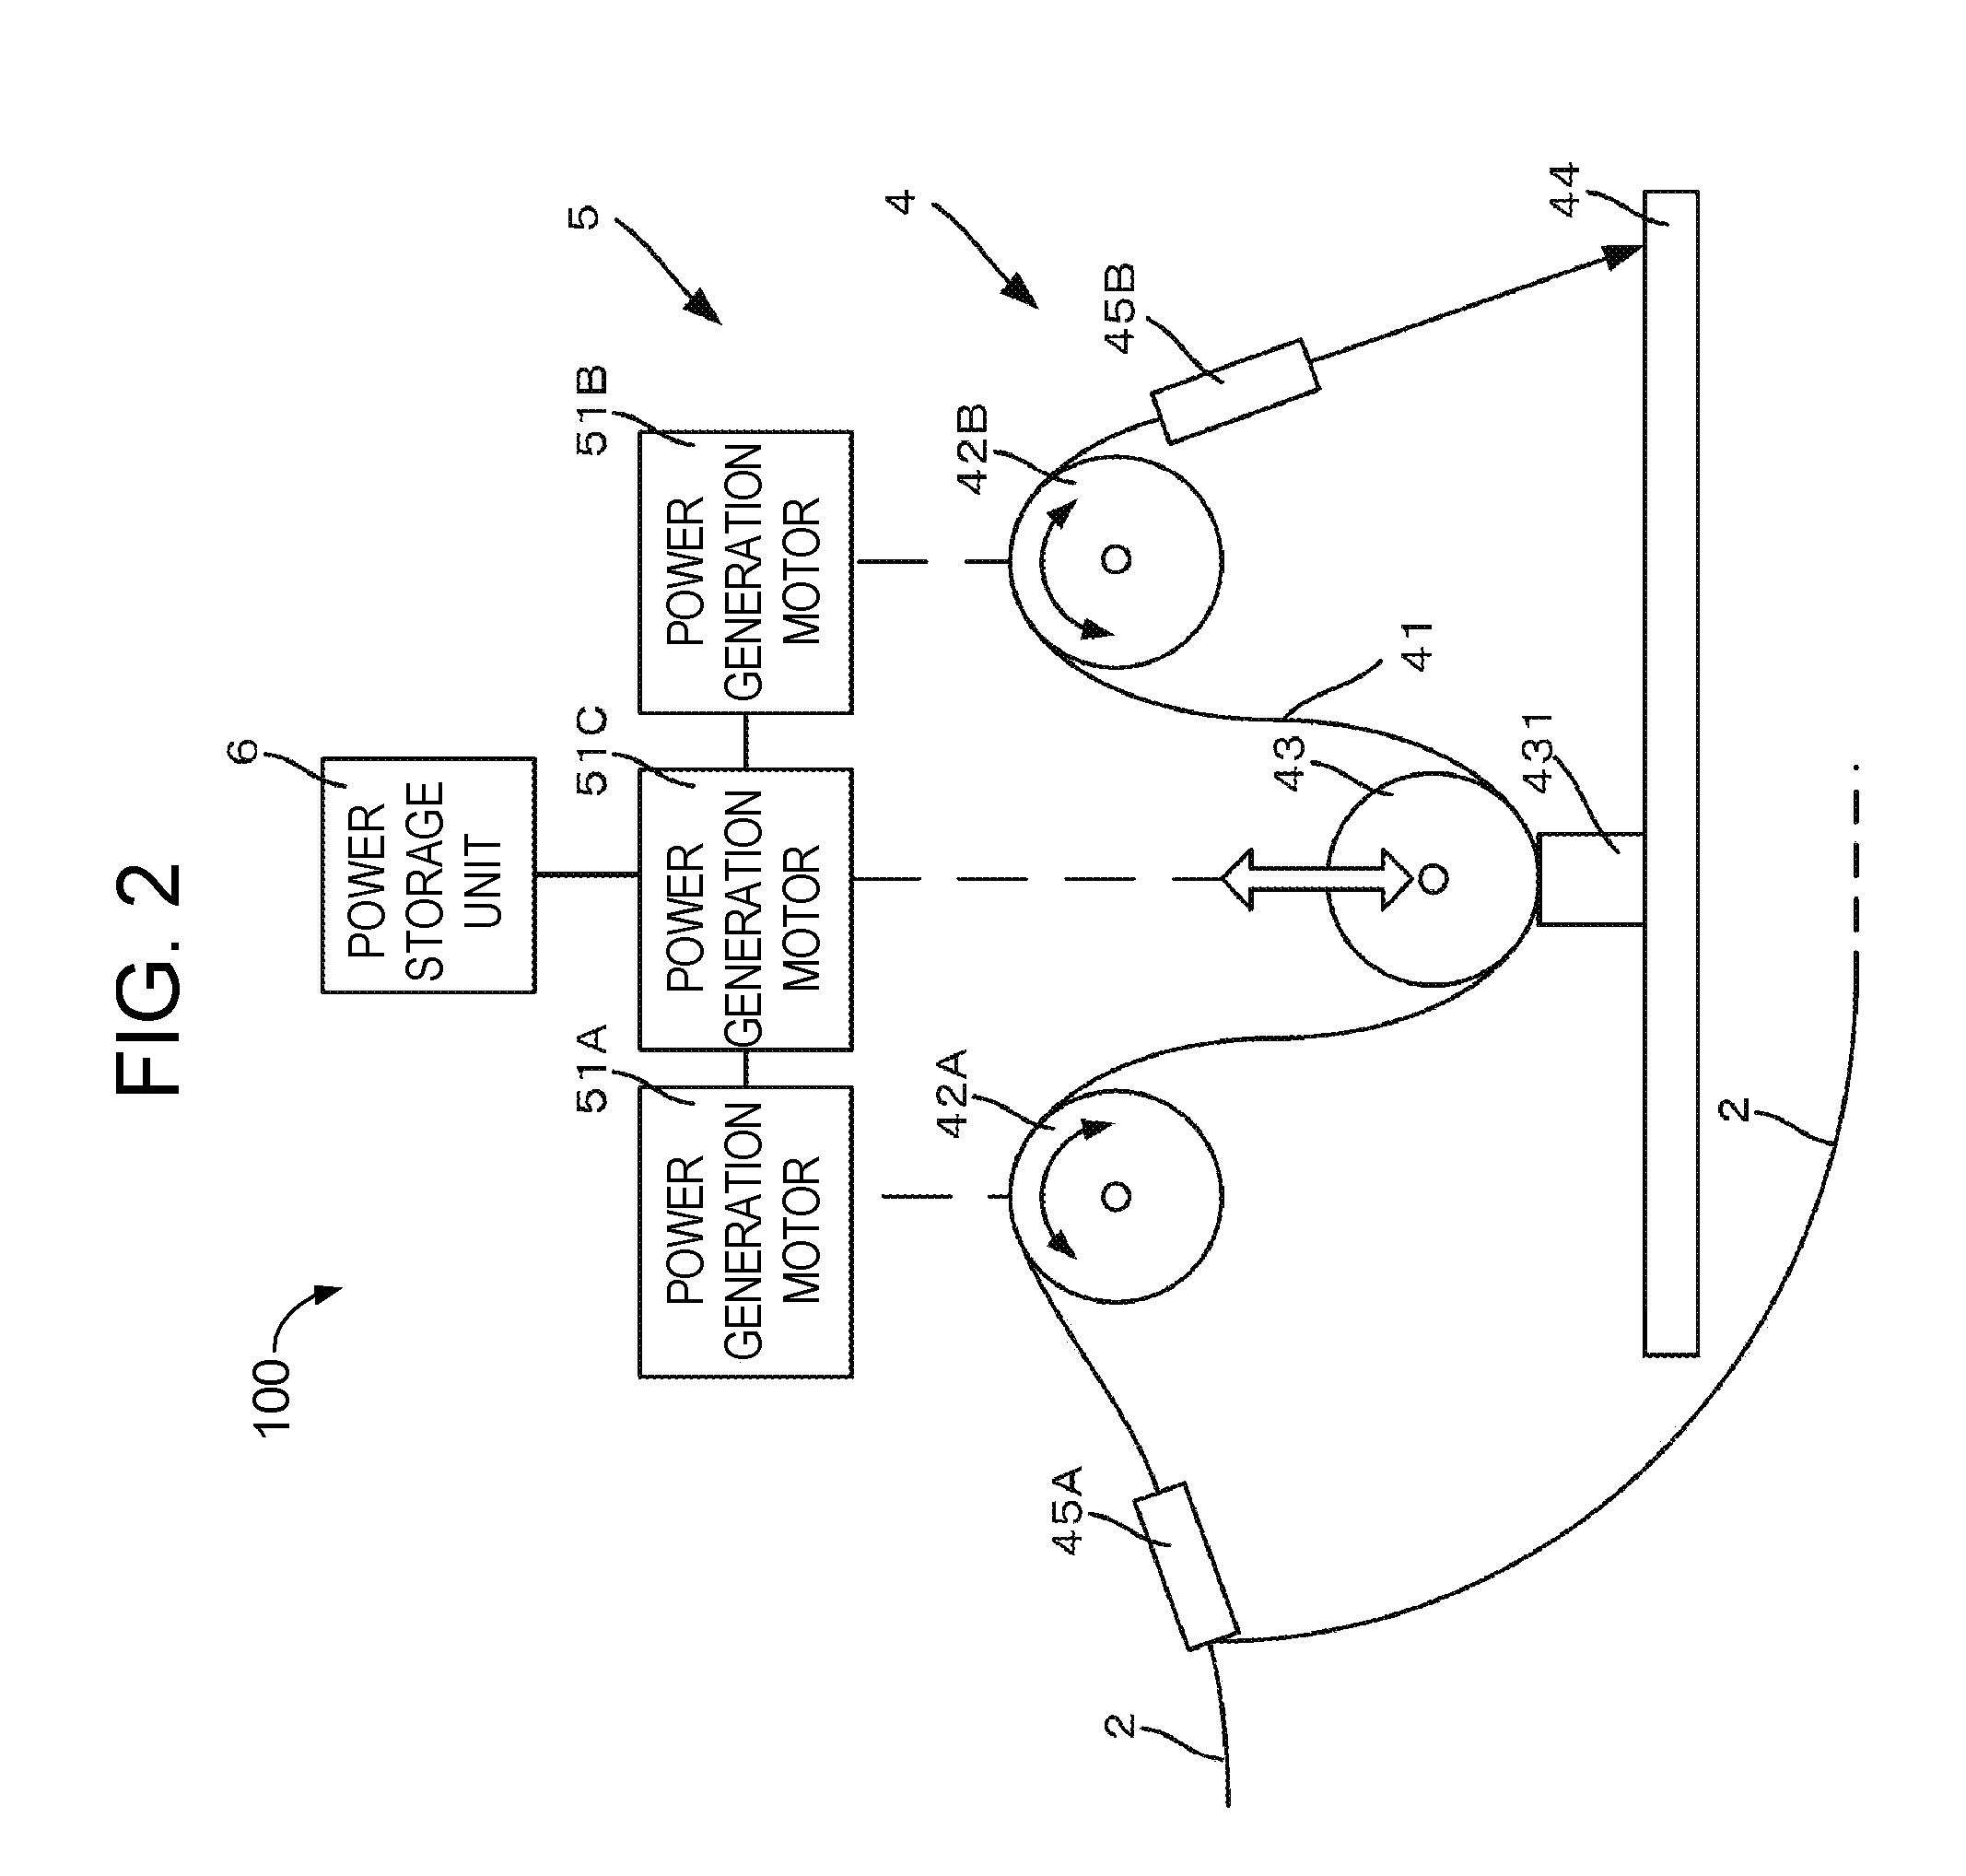 Power generation system and sensing system